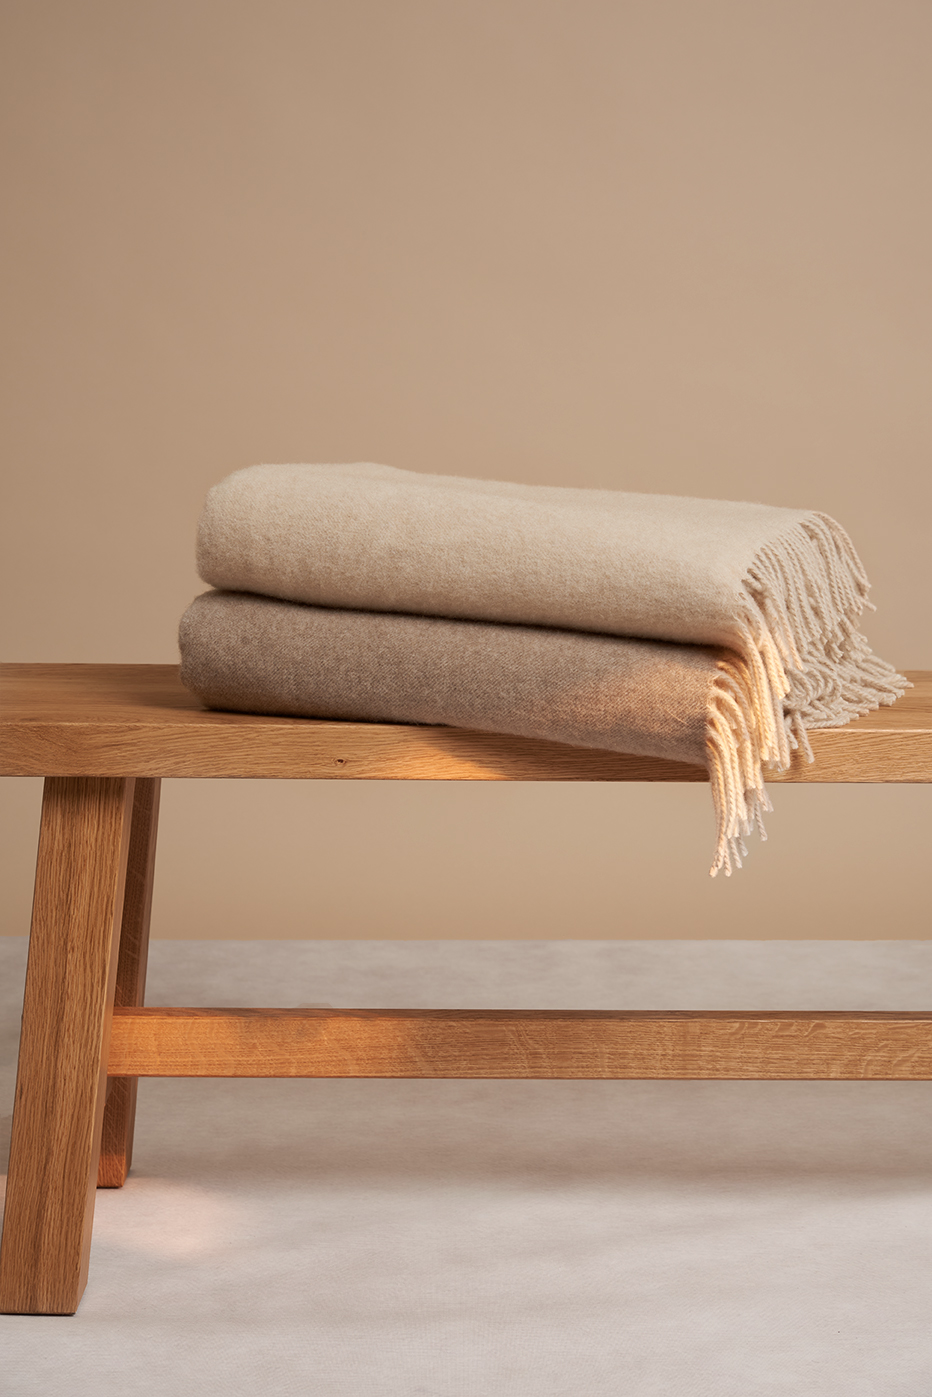 Blankets on a bench. Photographed by Studio Taupe